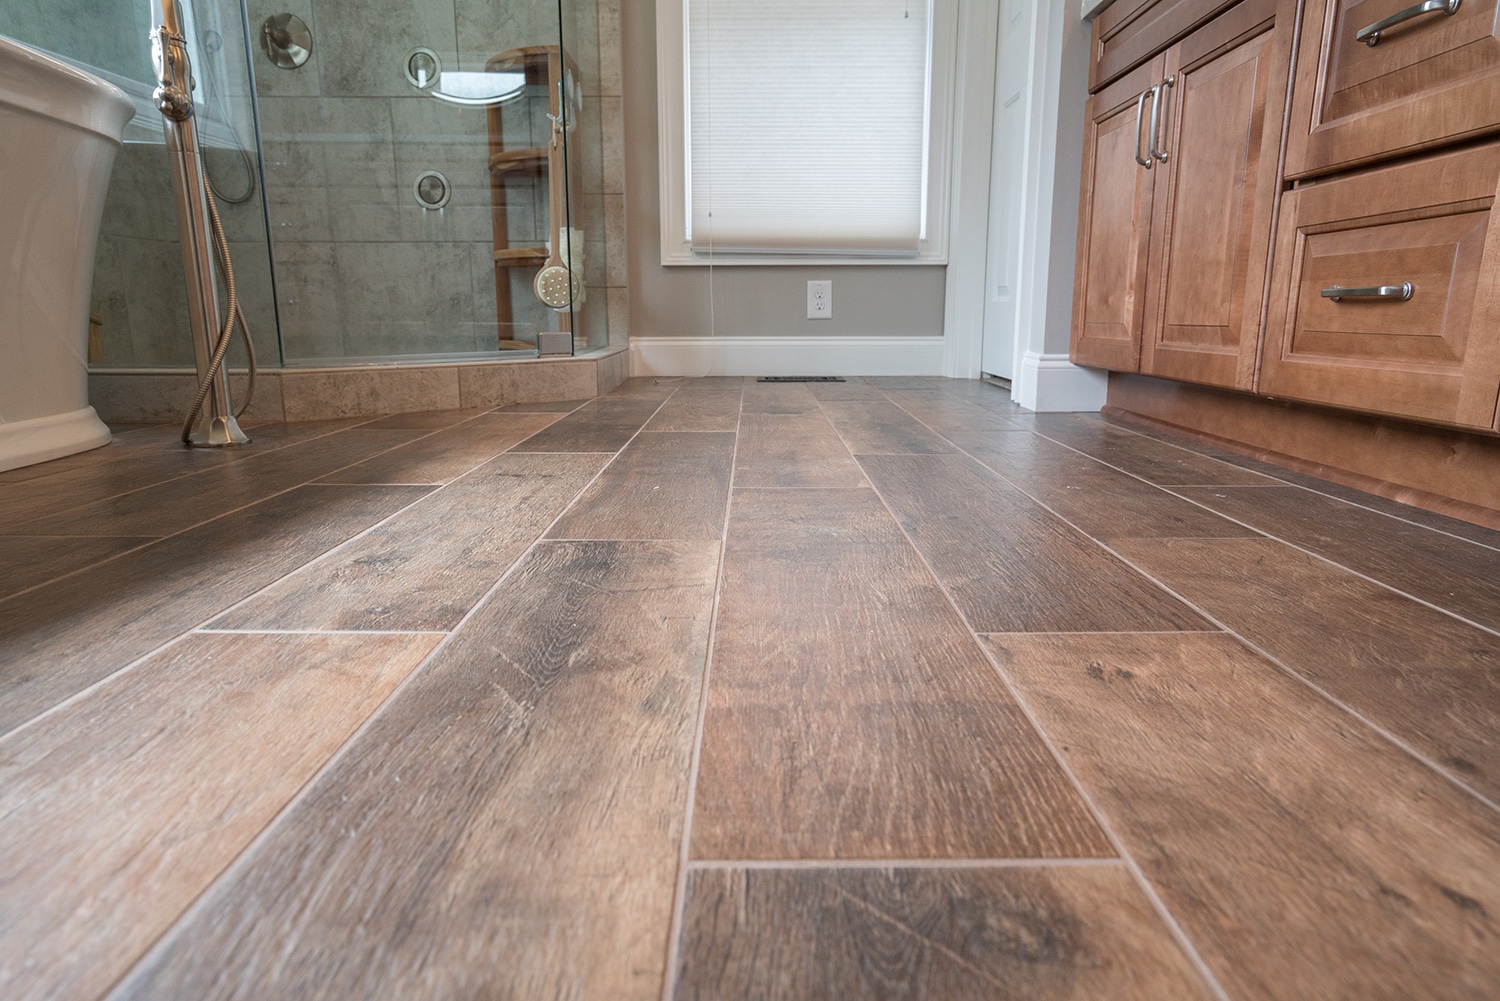 Pros And Cons Of Tile Flooring Tracy, Porcelain Tile That Looks Like Wood Pros And Cons